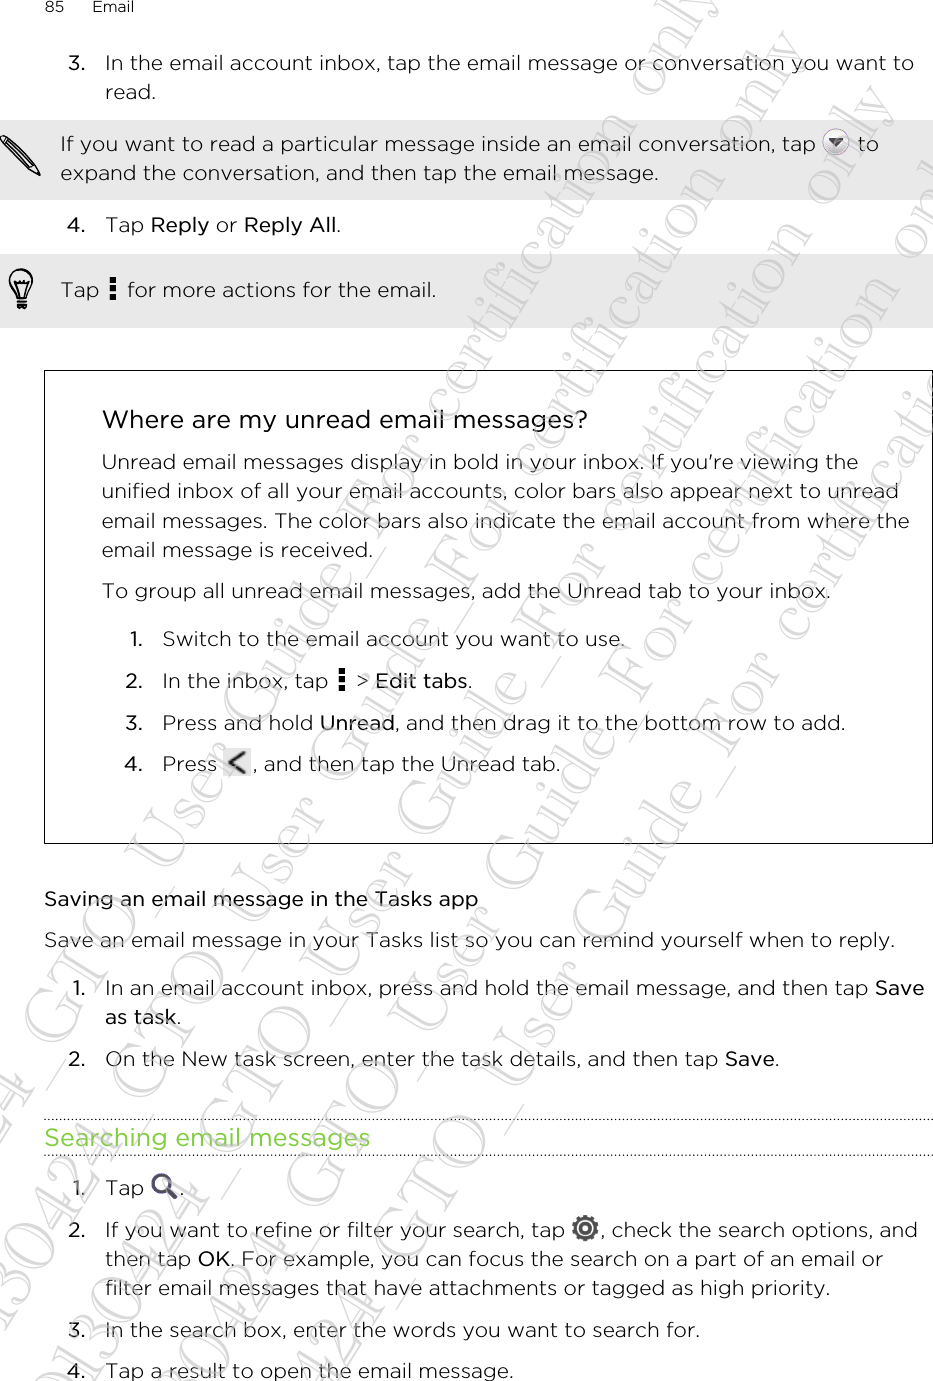 3. In the email account inbox, tap the email message or conversation you want toread. If you want to read a particular message inside an email conversation, tap   toexpand the conversation, and then tap the email message.4. Tap Reply or Reply All. Tap   for more actions for the email.Where are my unread email messages?Unread email messages display in bold in your inbox. If you&apos;re viewing theunified inbox of all your email accounts, color bars also appear next to unreademail messages. The color bars also indicate the email account from where theemail message is received.To group all unread email messages, add the Unread tab to your inbox.1. Switch to the email account you want to use.2. In the inbox, tap   &gt; Edit tabs.3. Press and hold Unread, and then drag it to the bottom row to add.4. Press  , and then tap the Unread tab.Saving an email message in the Tasks appSave an email message in your Tasks list so you can remind yourself when to reply.1. In an email account inbox, press and hold the email message, and then tap Saveas task.2. On the New task screen, enter the task details, and then tap Save.Searching email messages1. Tap  .2. If you want to refine or filter your search, tap  , check the search options, andthen tap OK. For example, you can focus the search on a part of an email orfilter email messages that have attachments or tagged as high priority.3. In the search box, enter the words you want to search for.4. Tap a result to open the email message.85 Email20130424_GTO_User Guide_For certification only 20130424_GTO_User Guide_For certification only 20130424_GTO_User Guide_For certification only 20130424_GTO_User Guide_For certification only 20130424_GTO_User Guide_For certification only